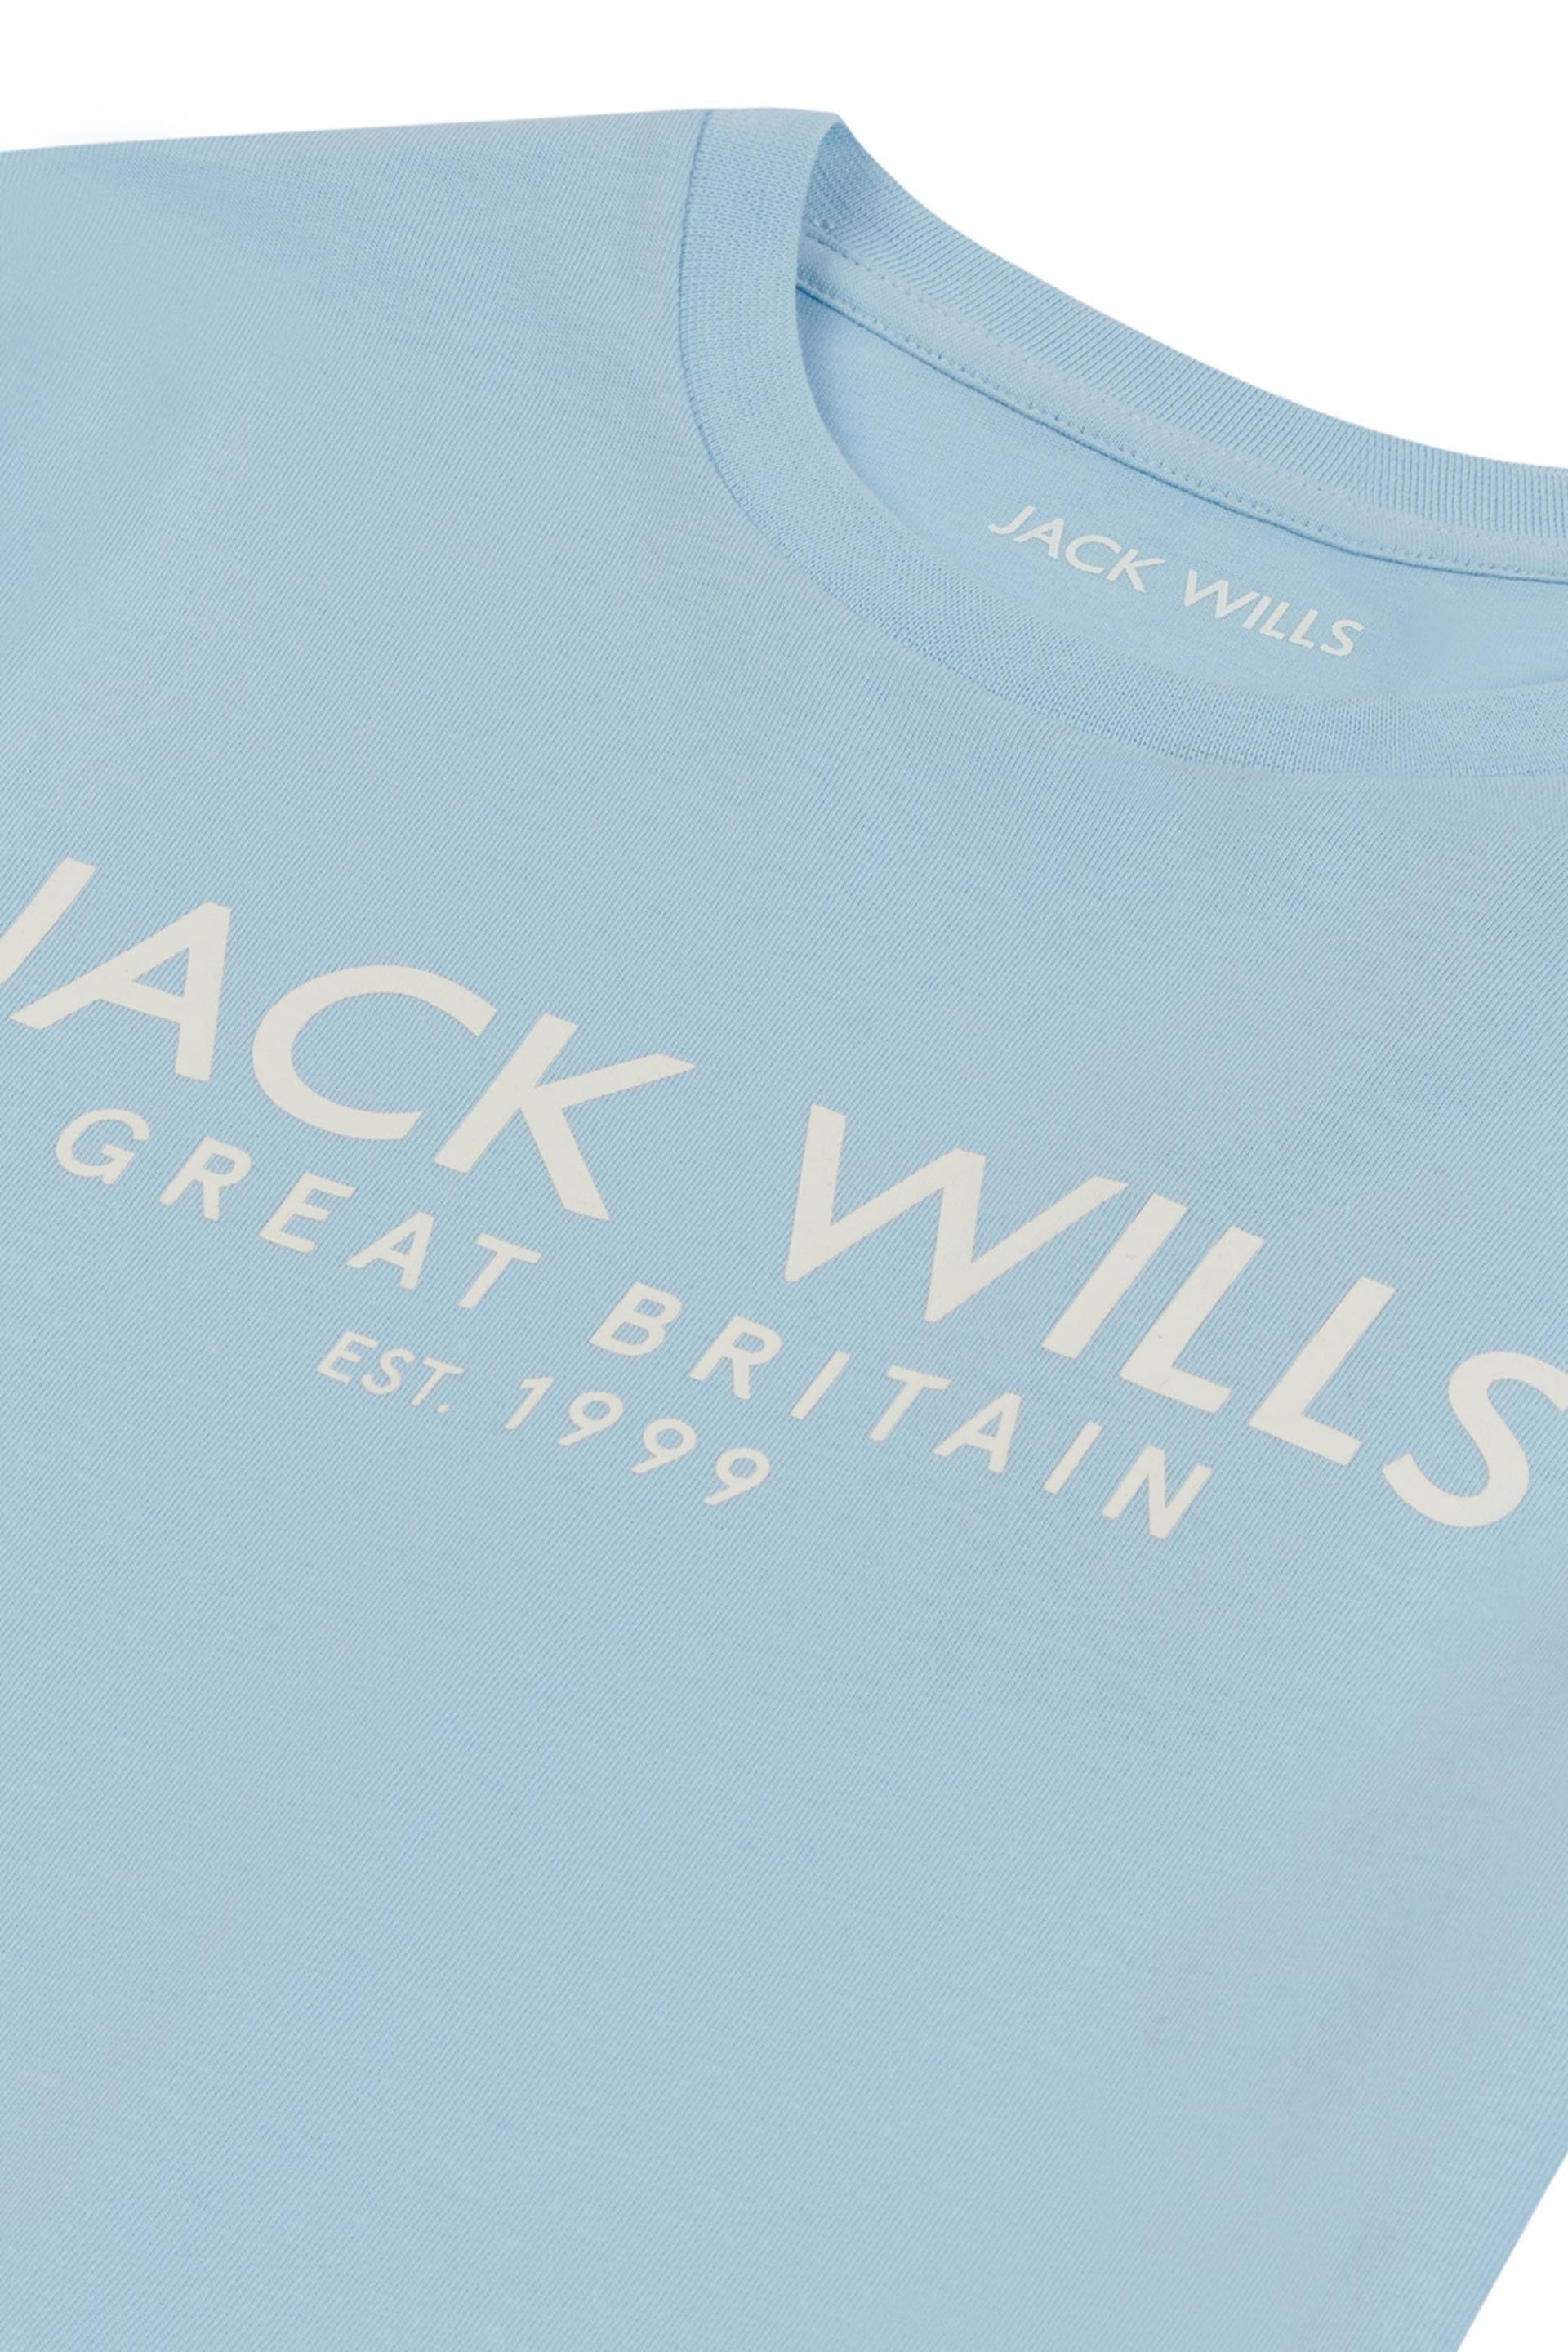 Jack Wills Boys Regular Fit Carnaby T-Shirt - Image 6 of 6